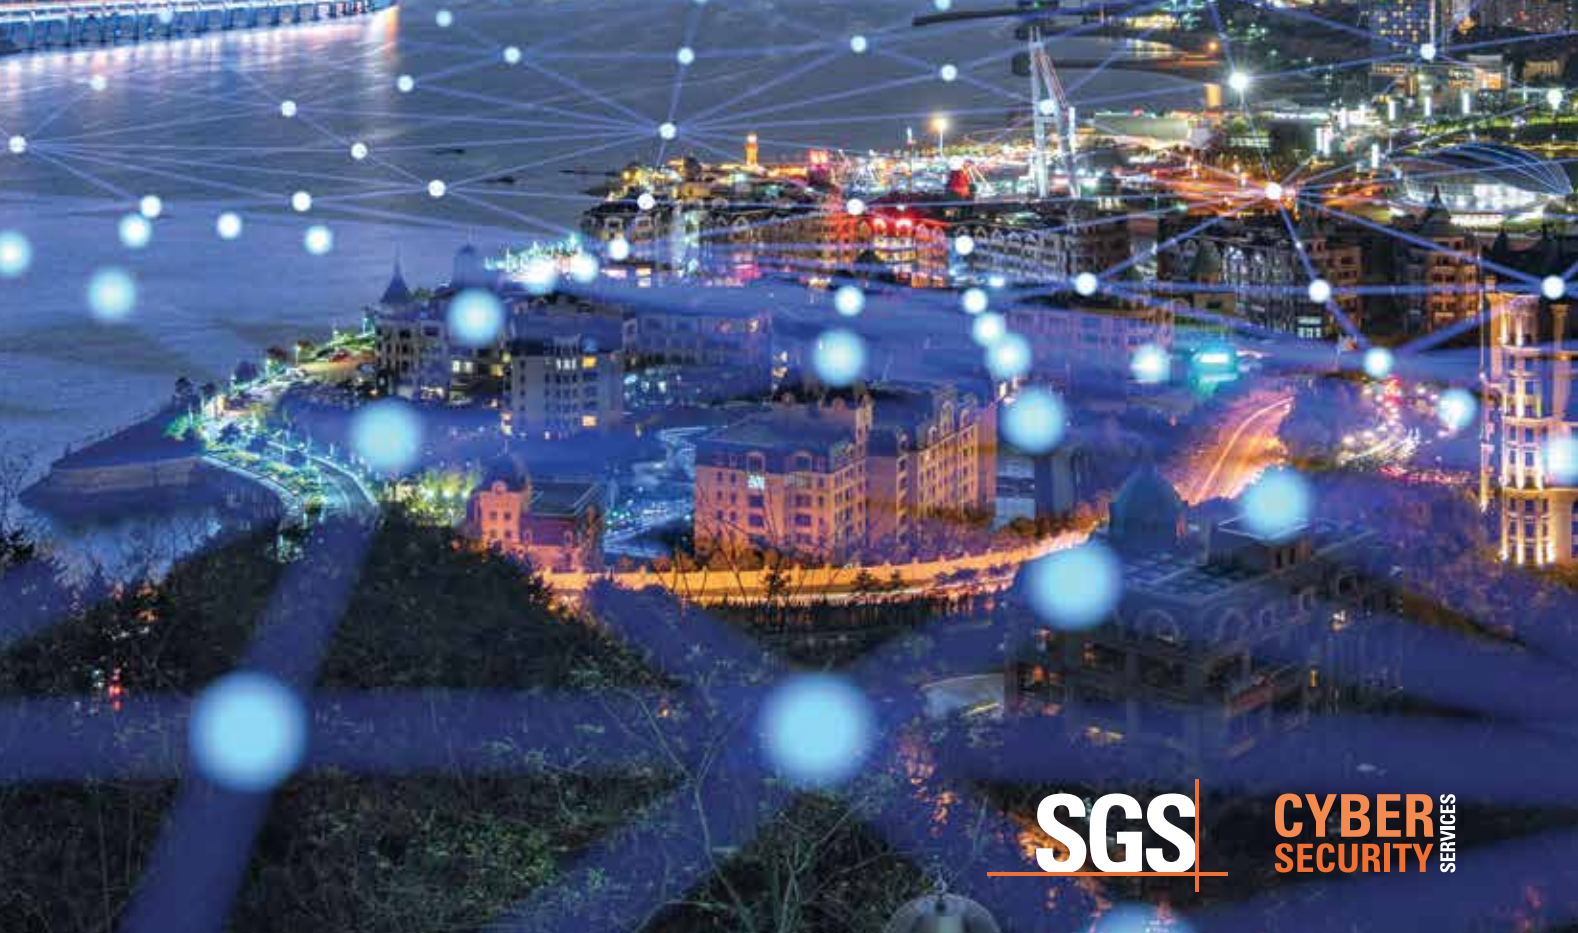 To Defeat Cybercriminals, SGS Launches Cybersecurity Services